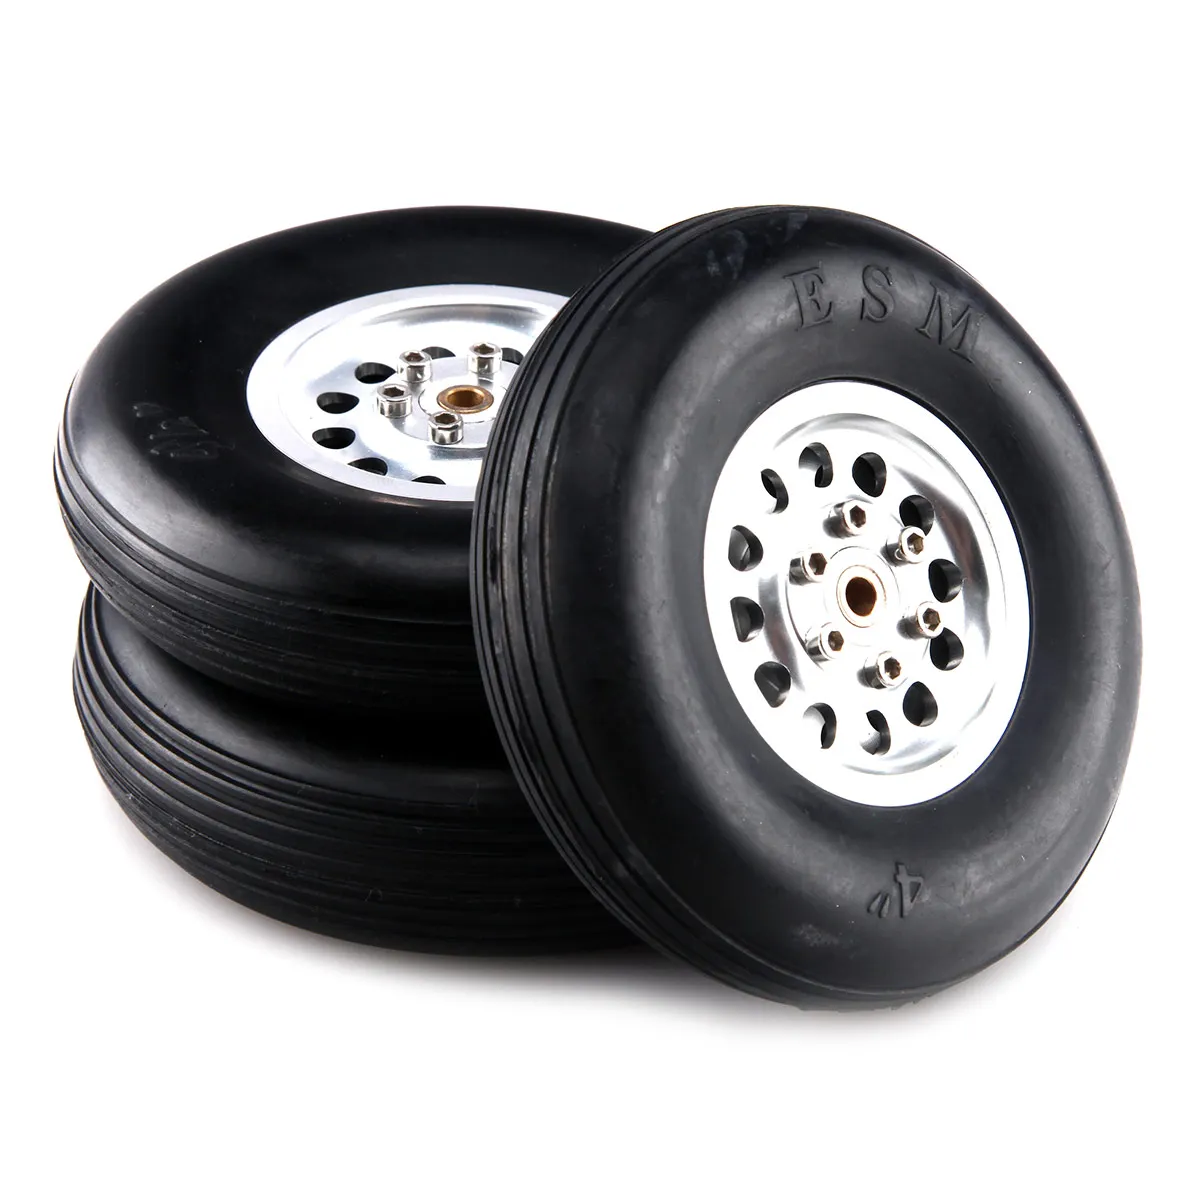 for RC Model Airplane 2 units 1.50" Rubber Wheel Tire with Plastic Hub 